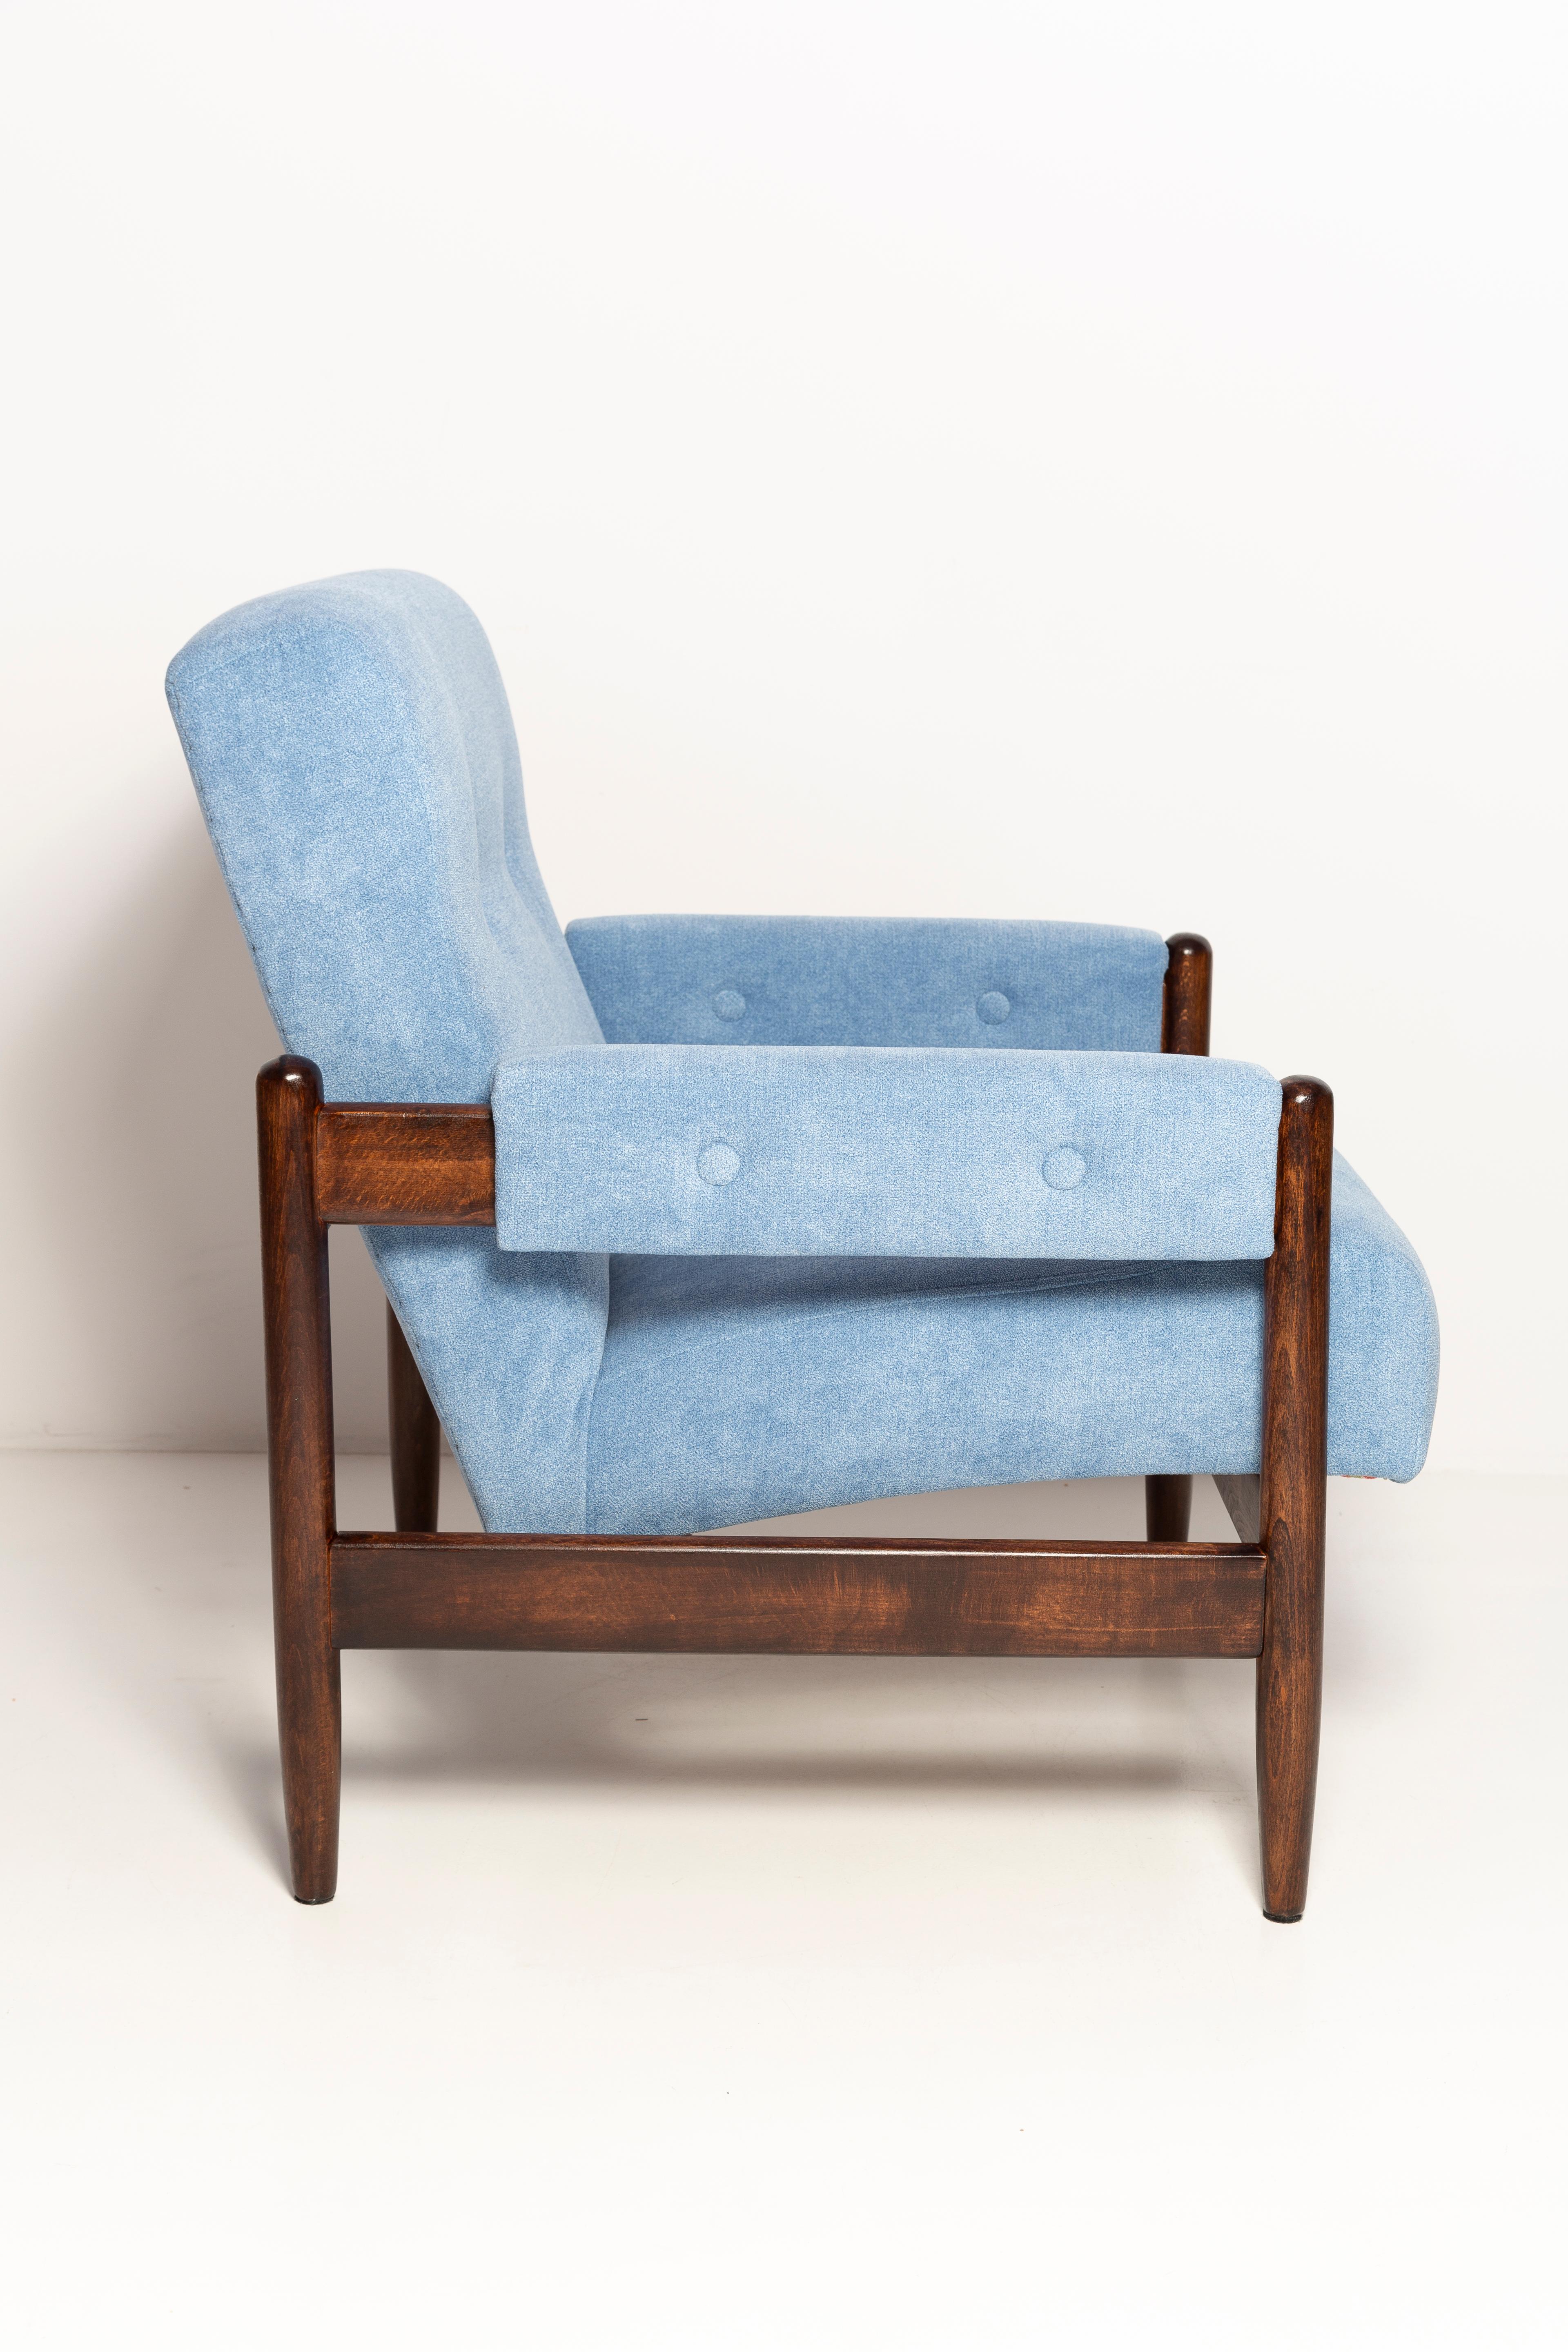 Hand-Crafted Mid Century Baby Blue Velvet Vintage Armchair, Walnut Wood, Europe, 1960s For Sale